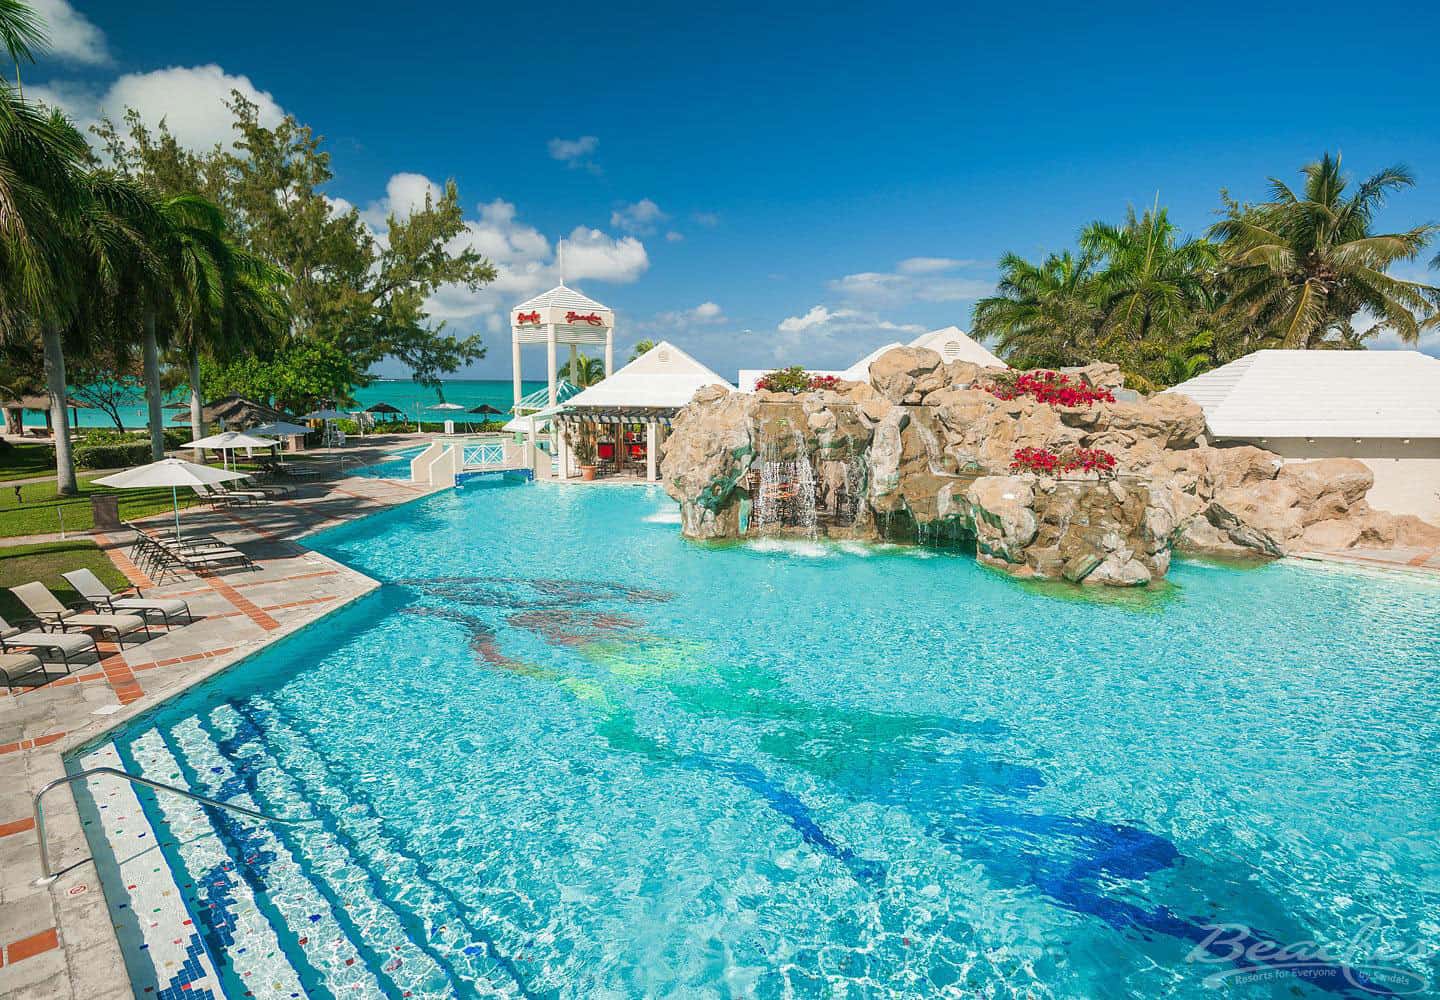 Beaches Turks and Caicos Offer pool view